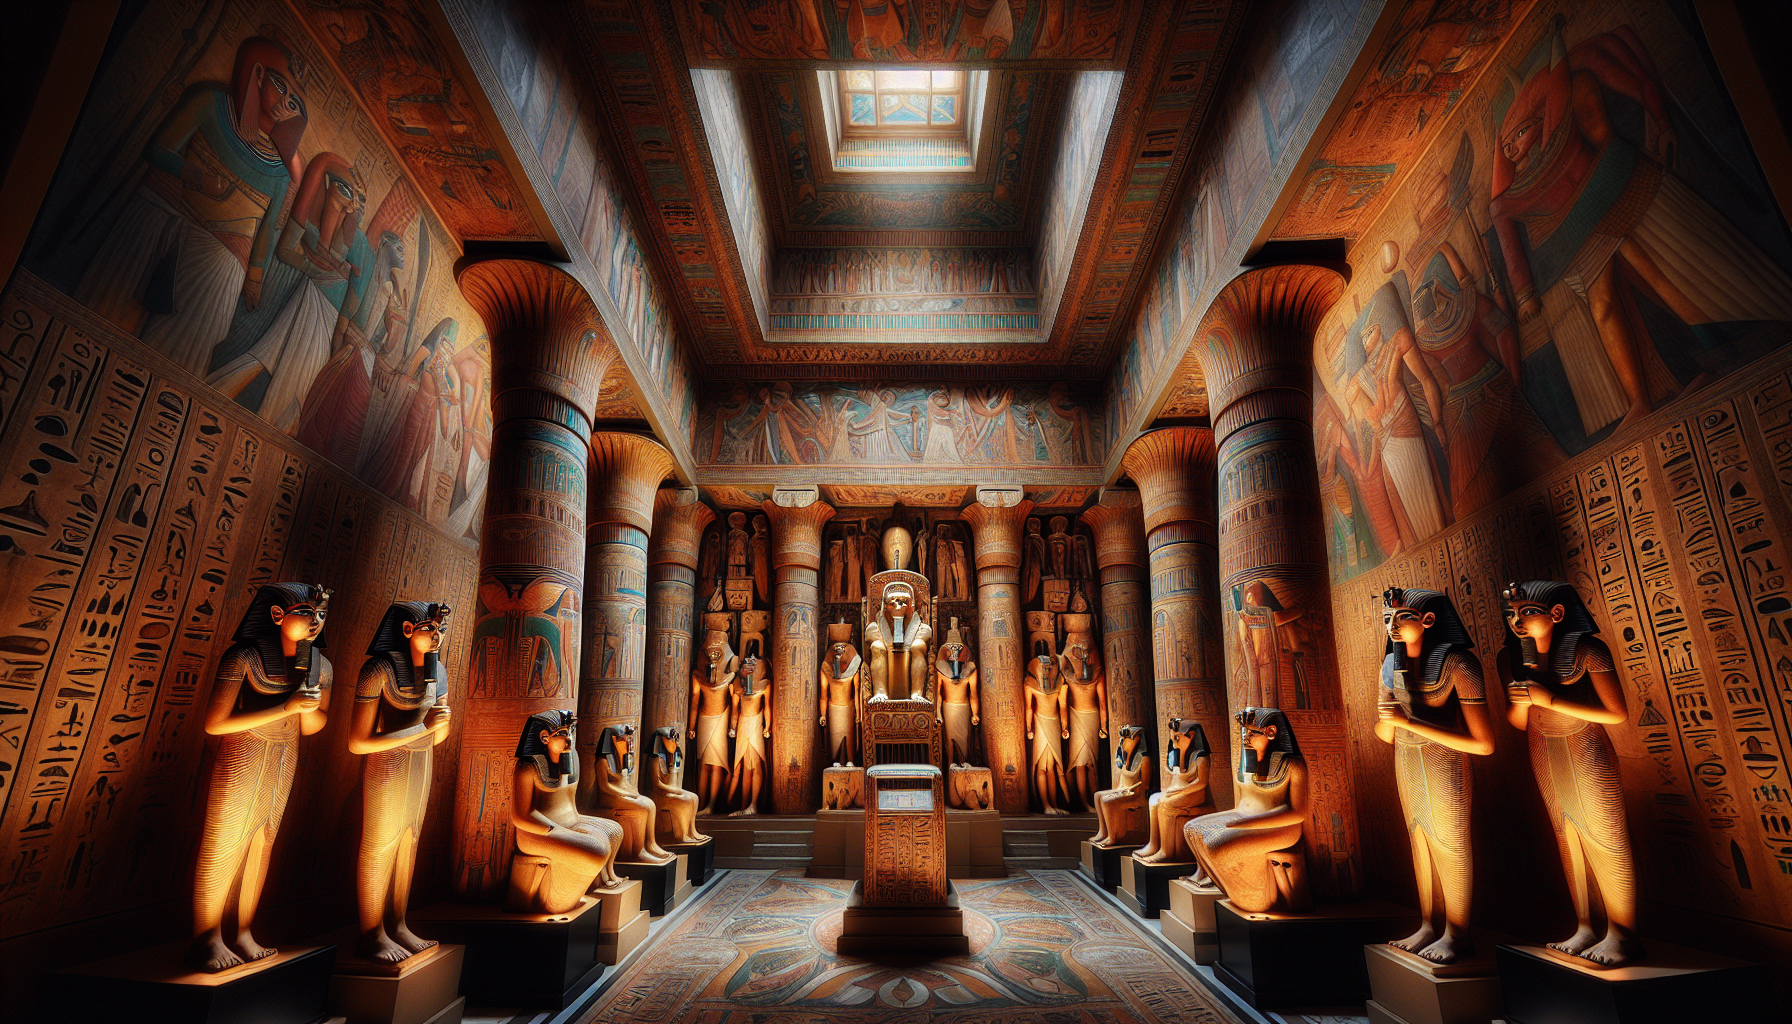 discover the enigmatic wonders housed in the egyptian museum and unlock the secrets of ancient treasures and mysteries within its walls.